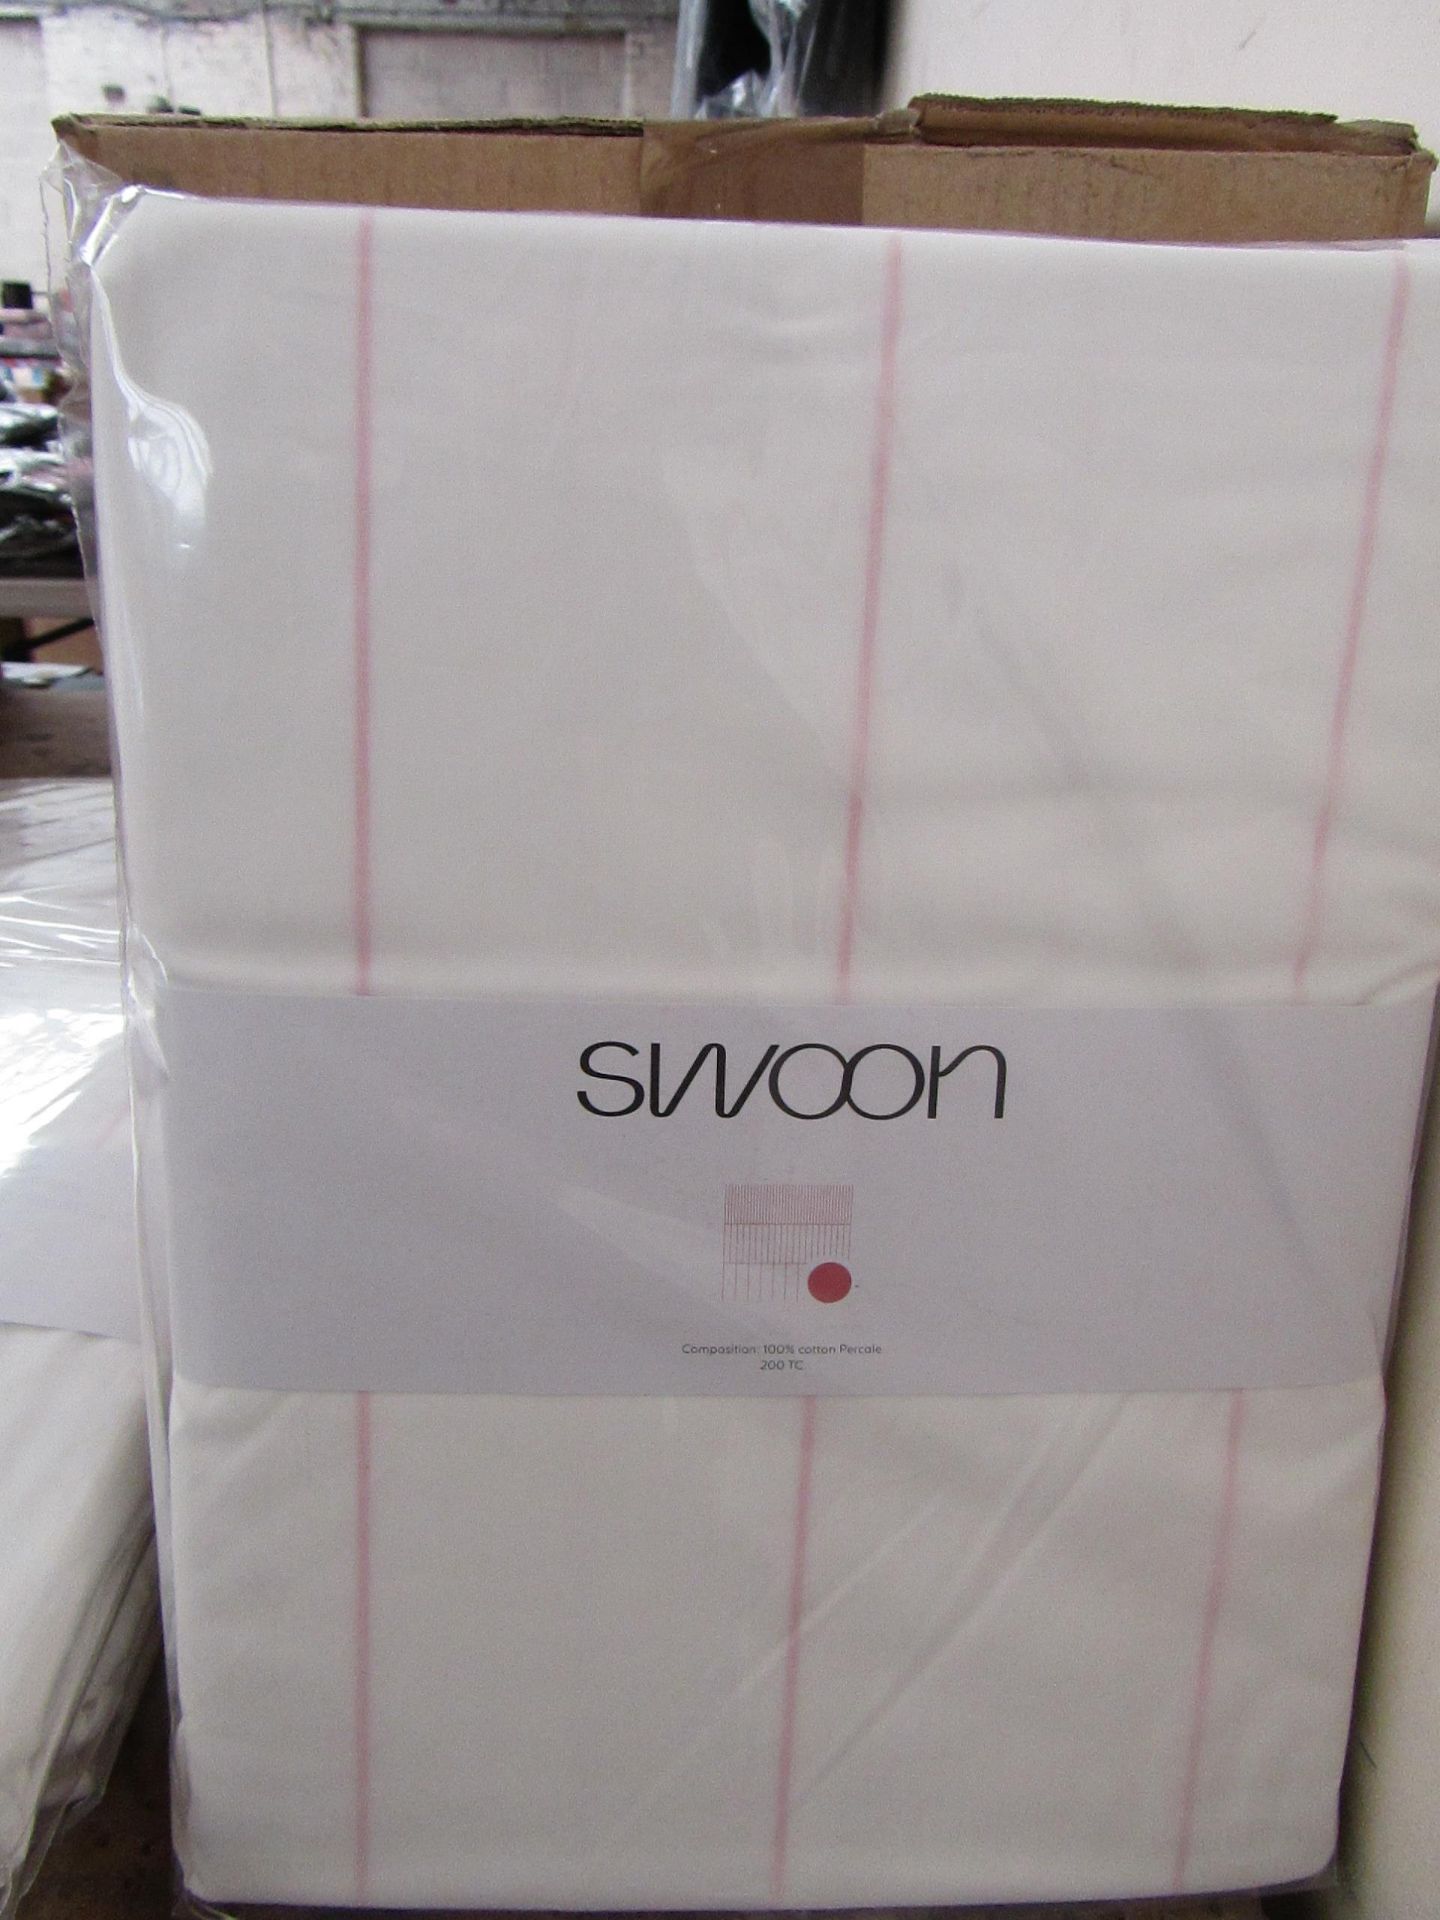 |1x SWOON NAPIER PINK KING SIZE DUVET SET THAT INCLUDE DUVET COVER AND 2 MATHCING PILLOW CASES | NEW - Image 2 of 2